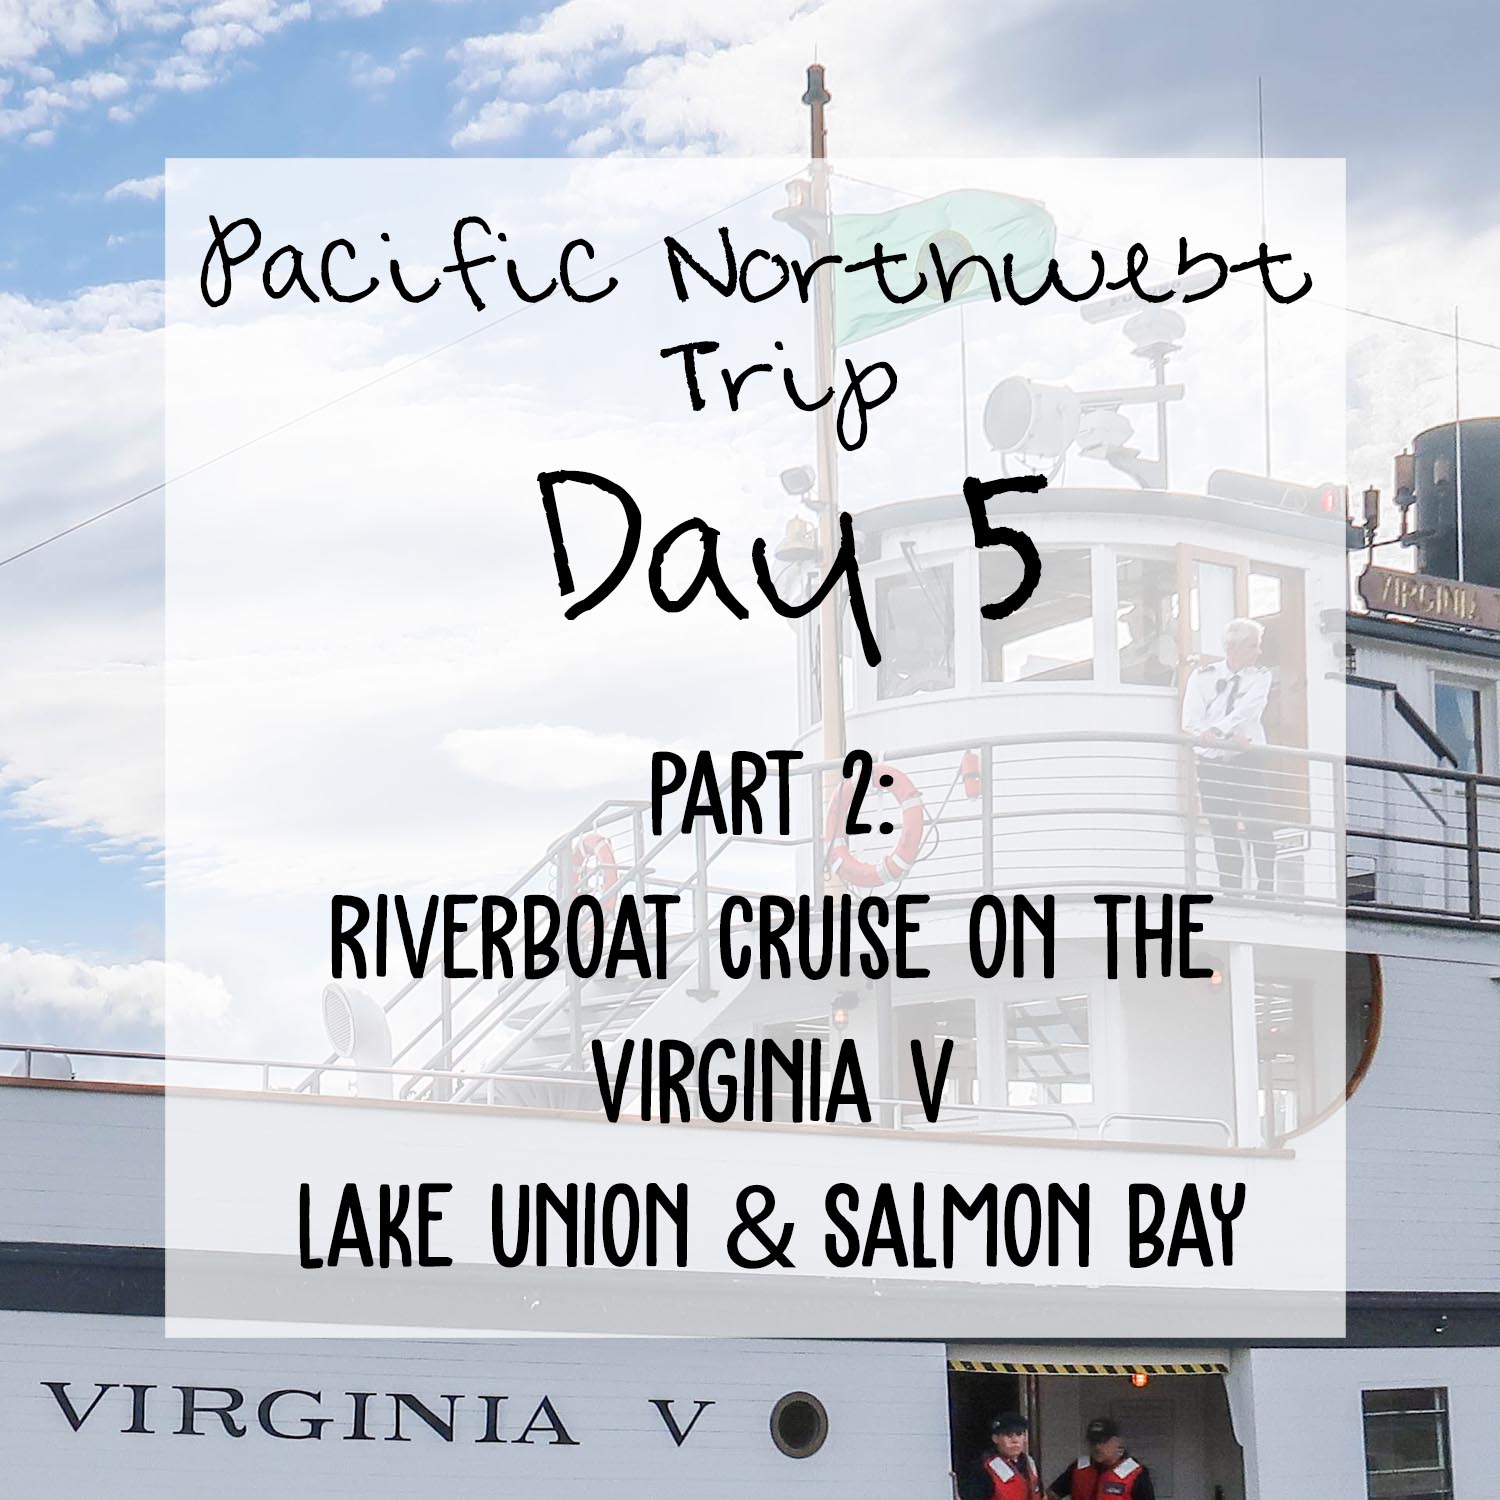 Pacific NW Trip: Day 5 - Part 2